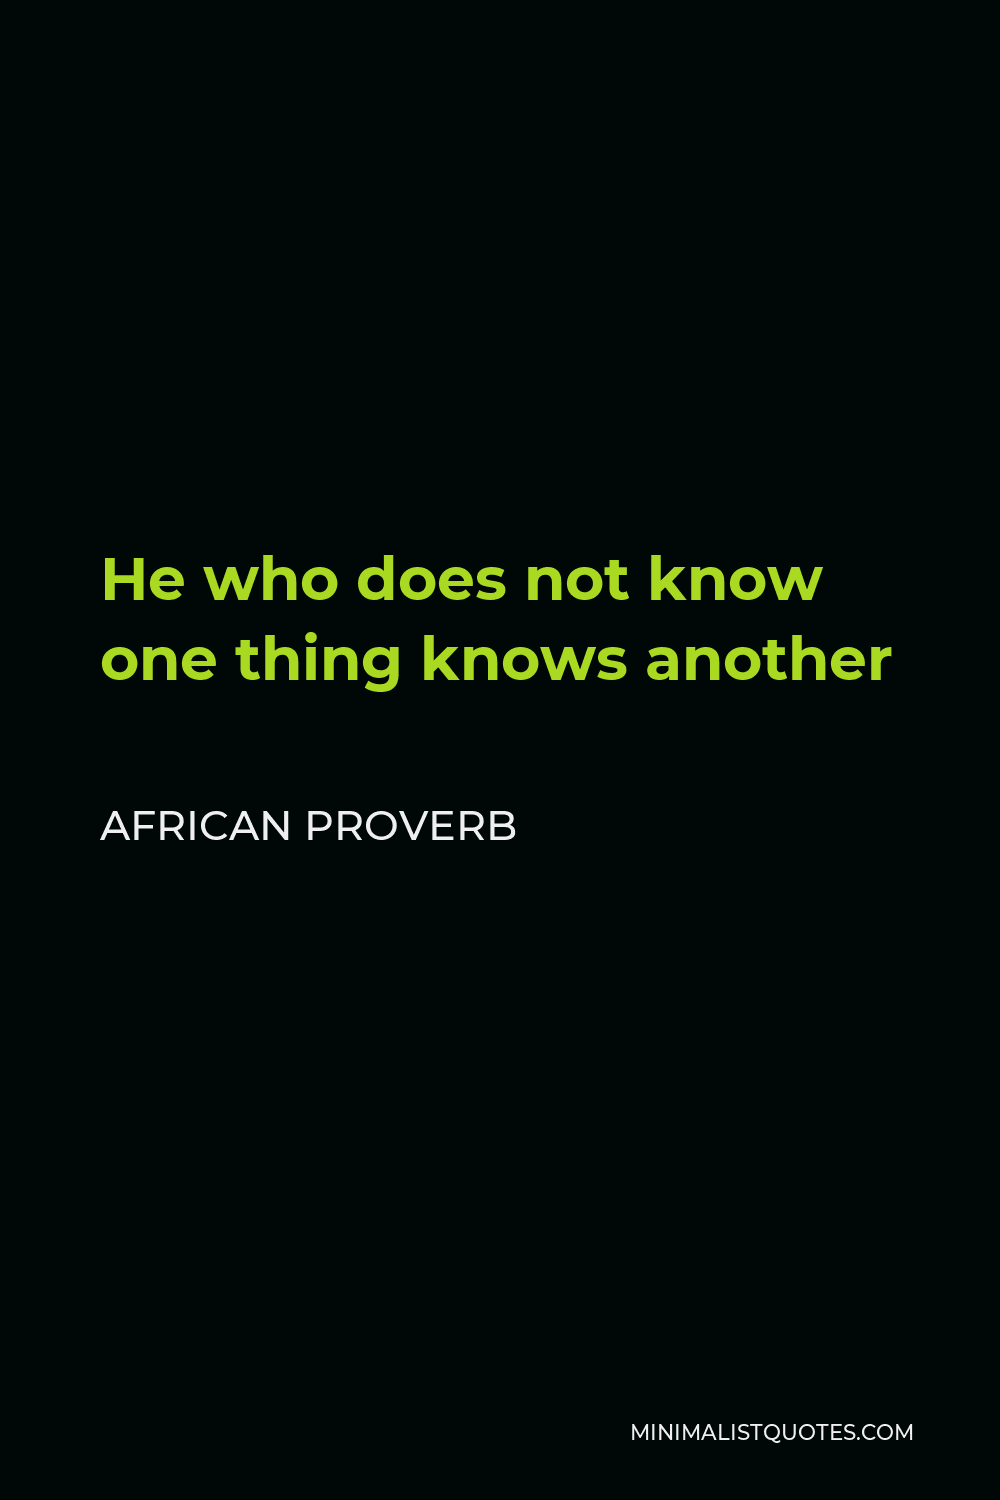 African Proverb Quote - He who does not know one thing knows another